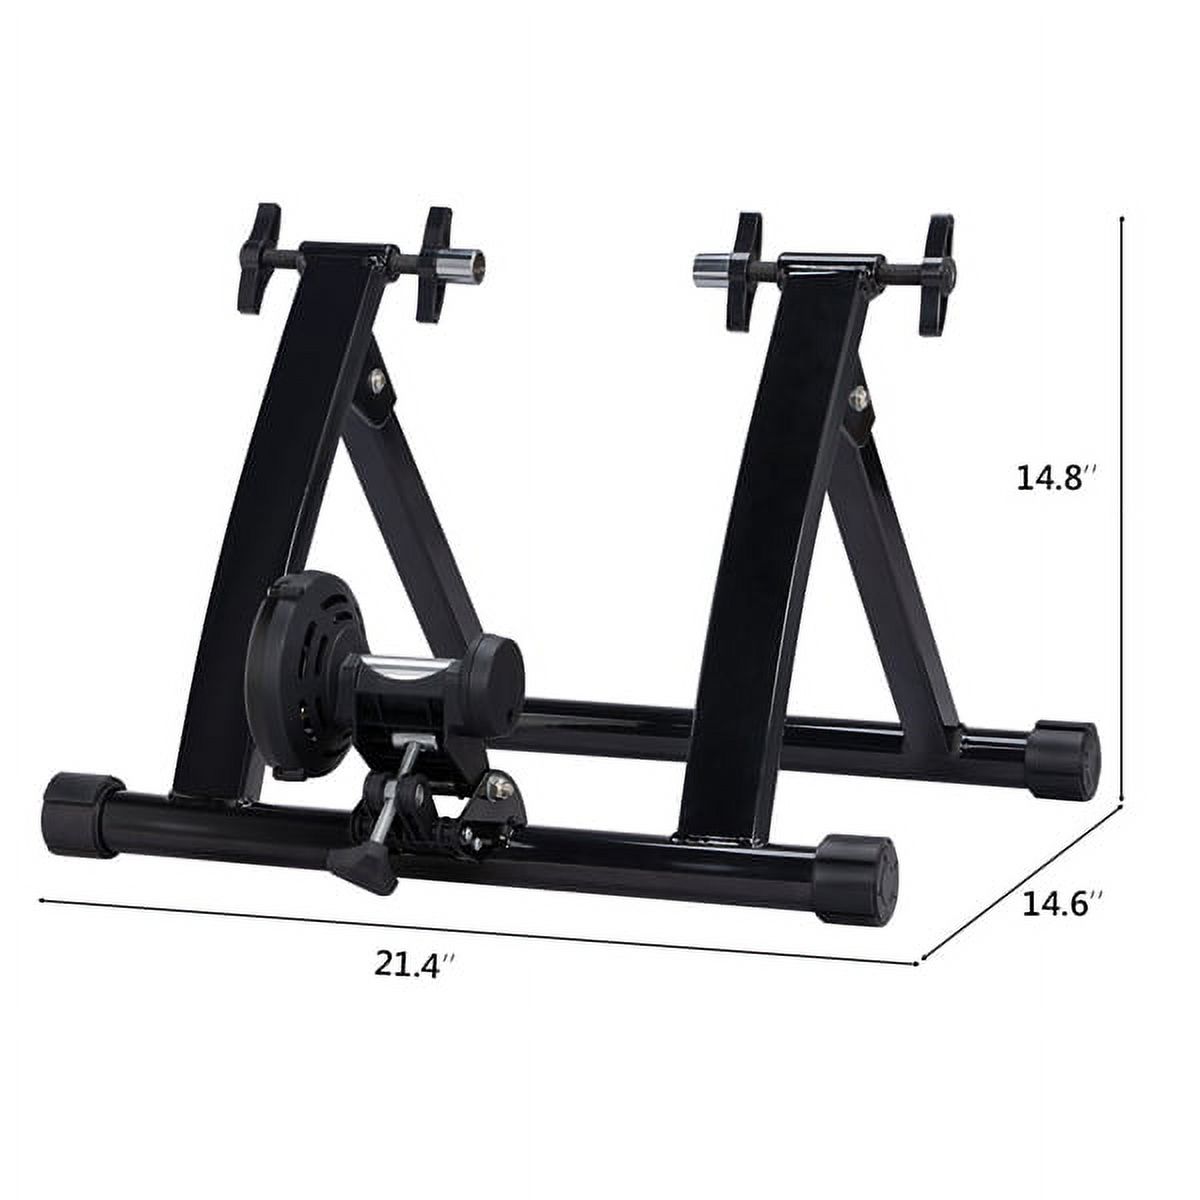 Topeakmart Foldable Indoor Bike Trainer Magnetic Cycle Trainer Stand with Front Wheel Support and Quick Release Skewer Black - image 3 of 14